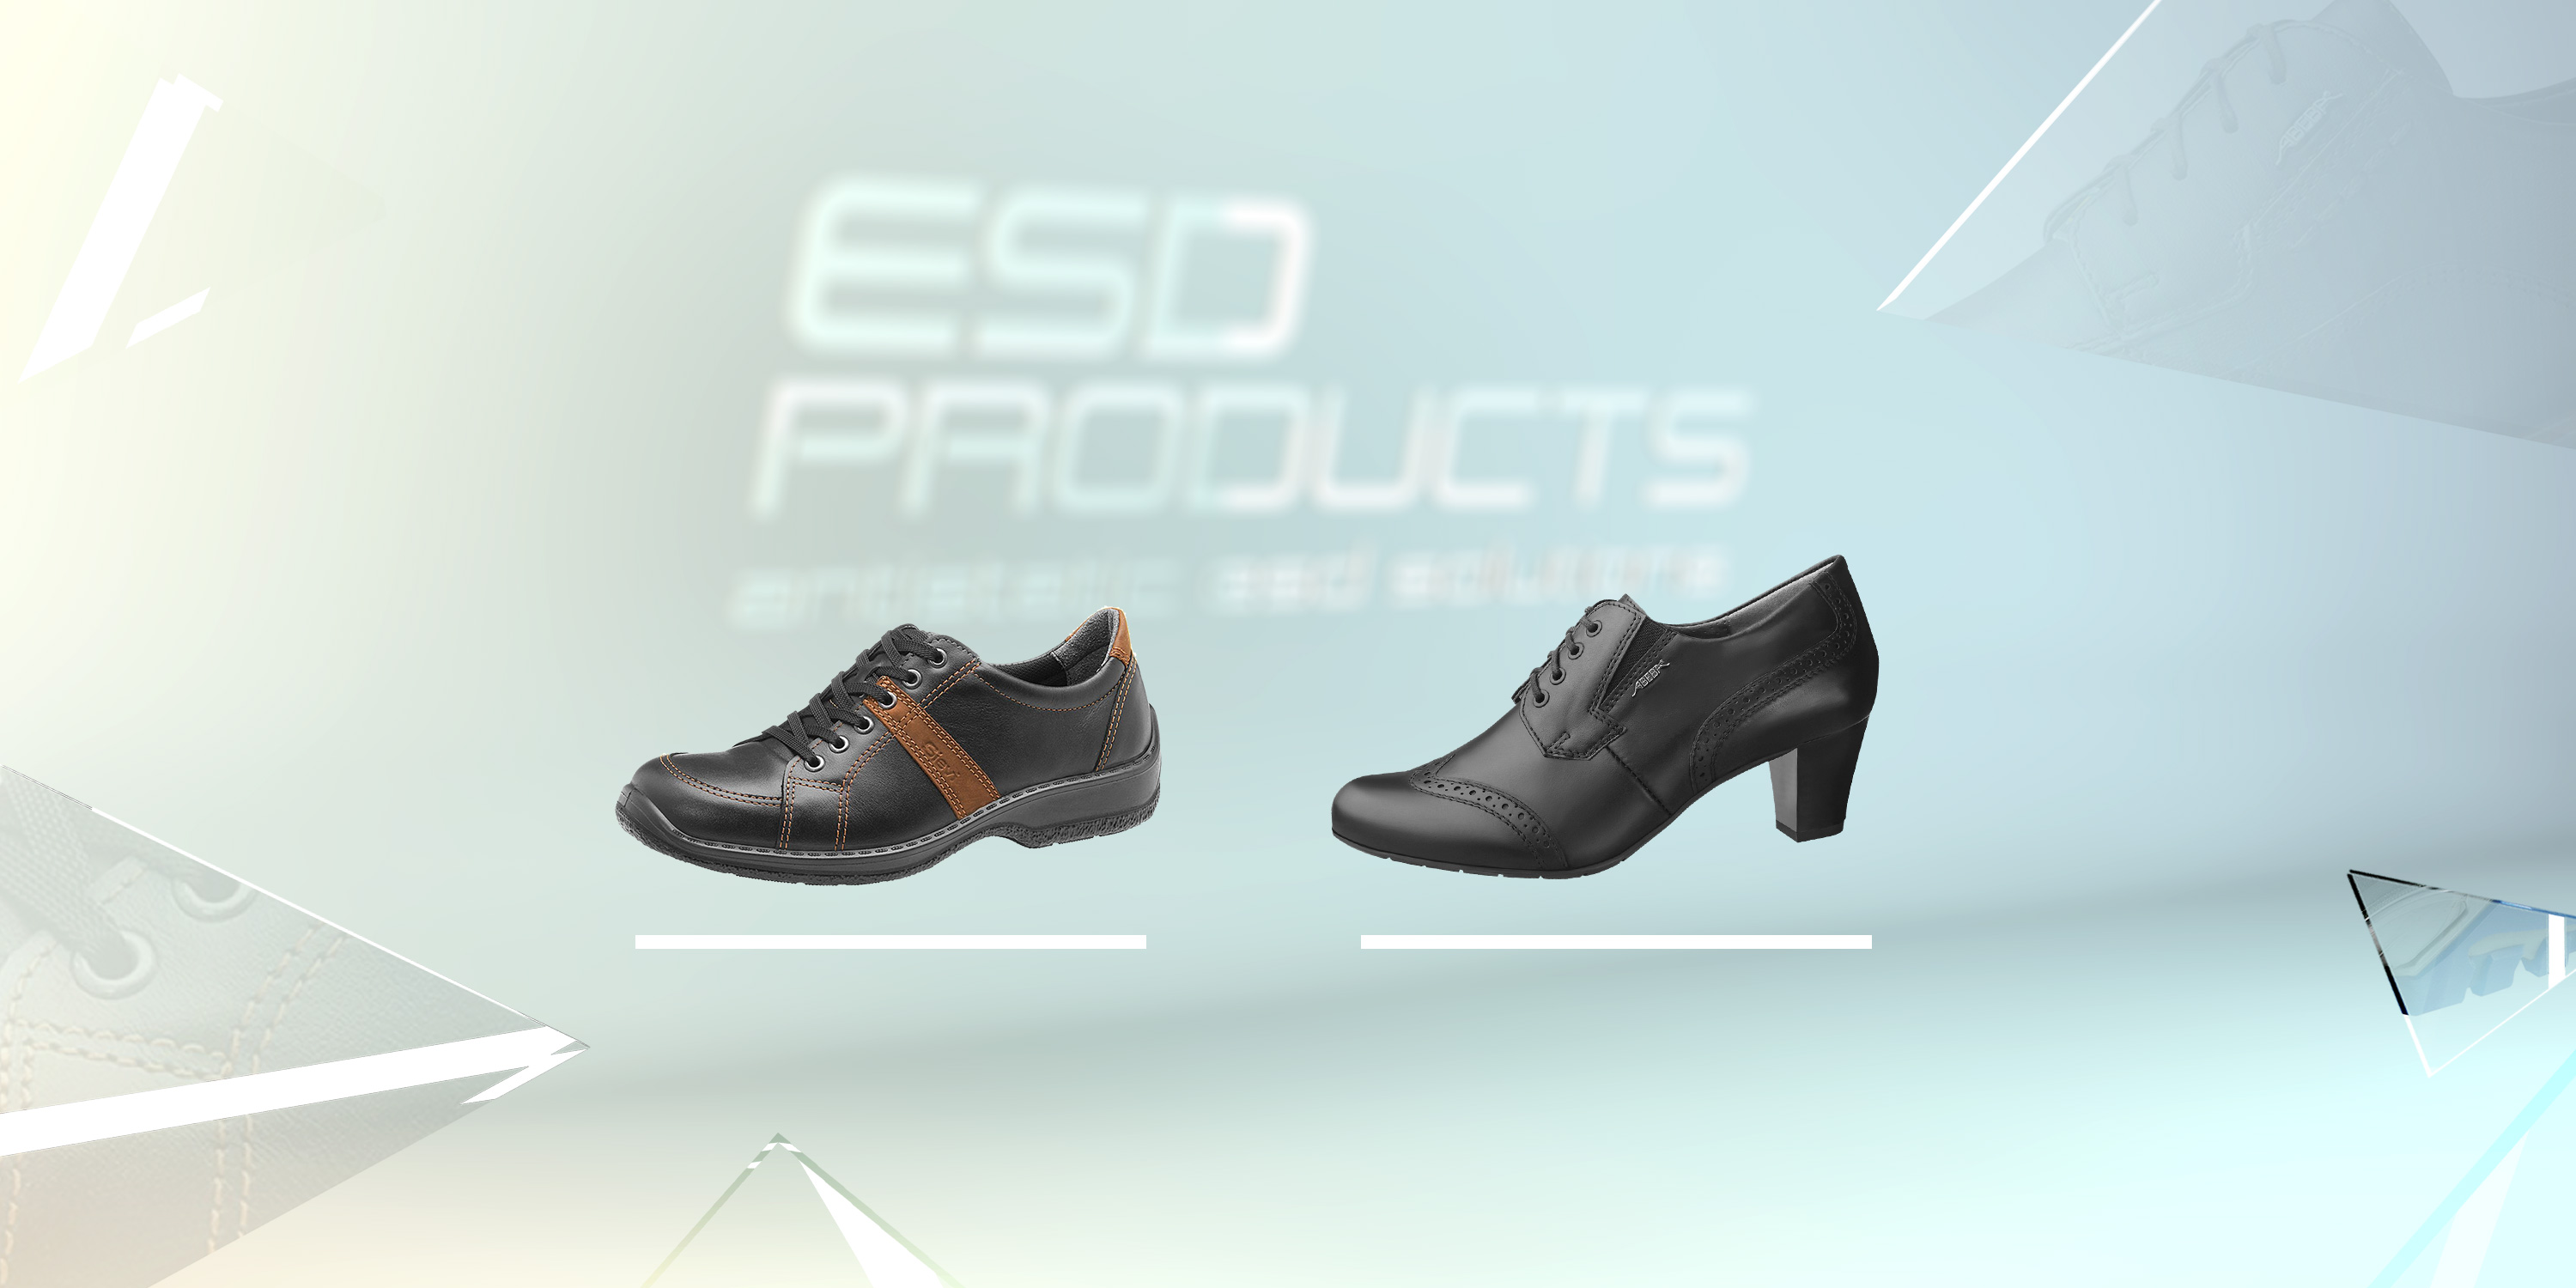 Anti-Static ESD Occupational Work and Safety Shoes Protective Footwear Electric Static Dissipative Footwear Anti Static antistatic AES 